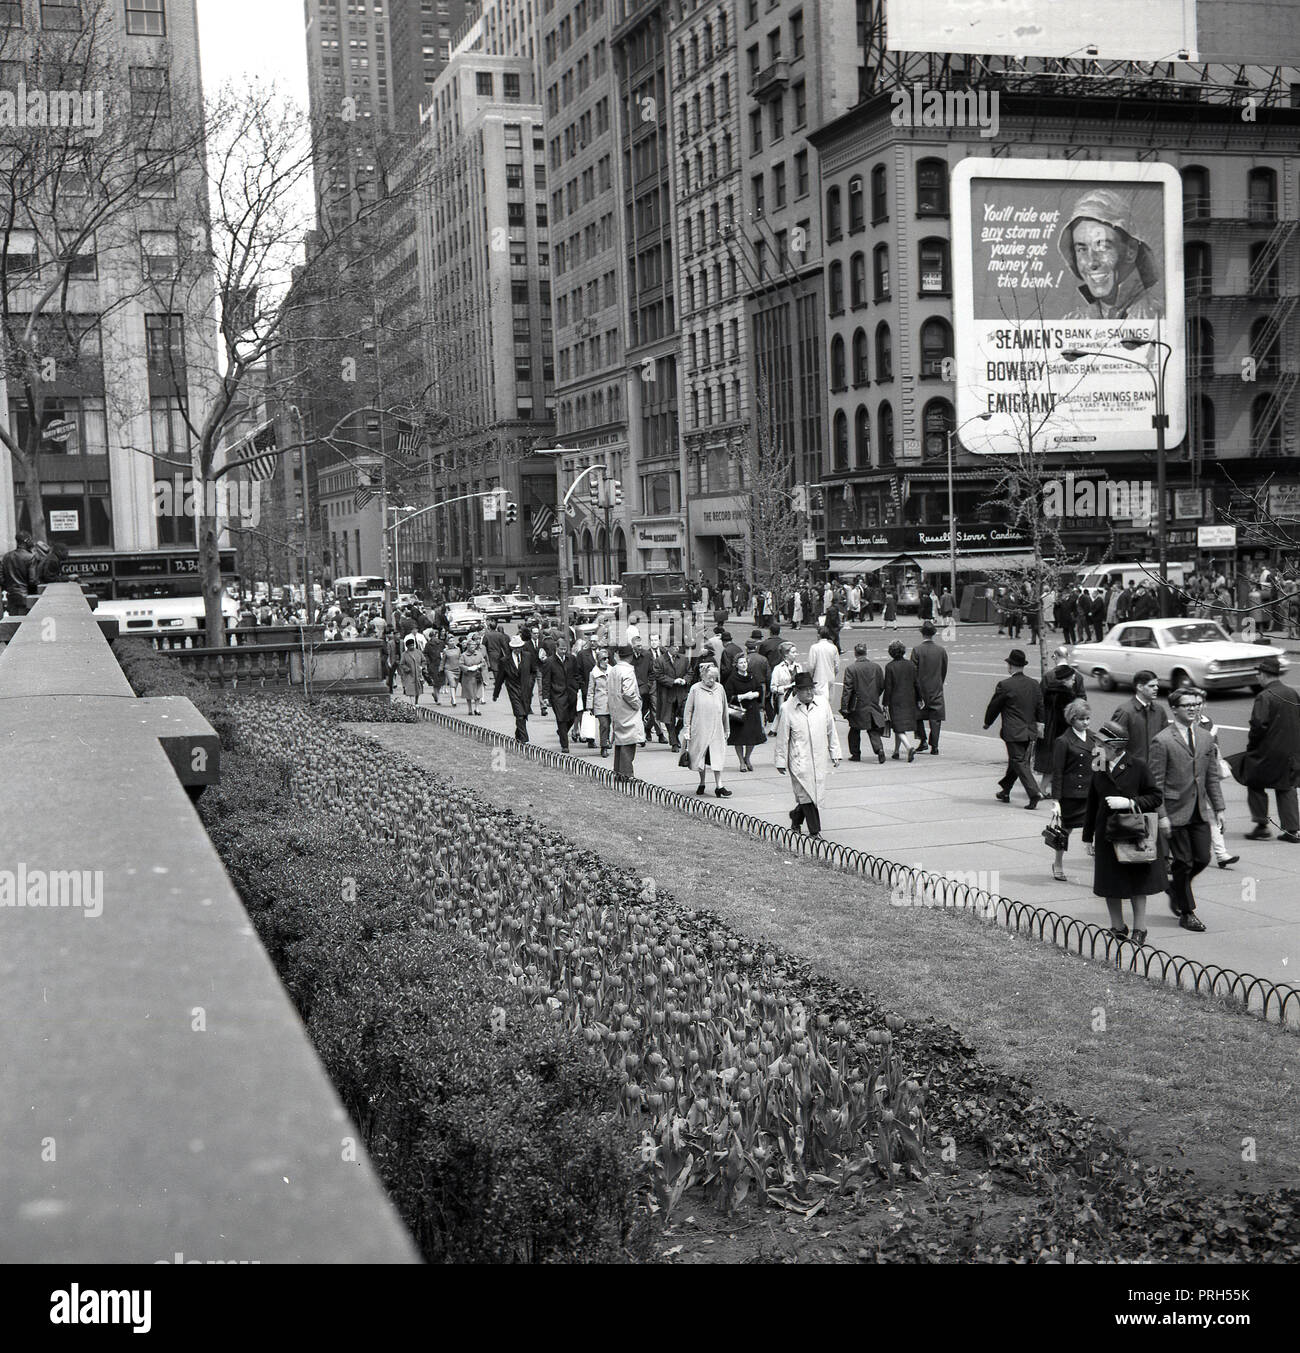 1960s, historical, picture shows New Yorkers in the financia or banking district of New York city, Wall Street, and a billboard for three US Saving Banks - the Seaman's bank for Savings, the Bowery Savings Bank and the Emigrant Industrial Savings Bank. Stock Photo